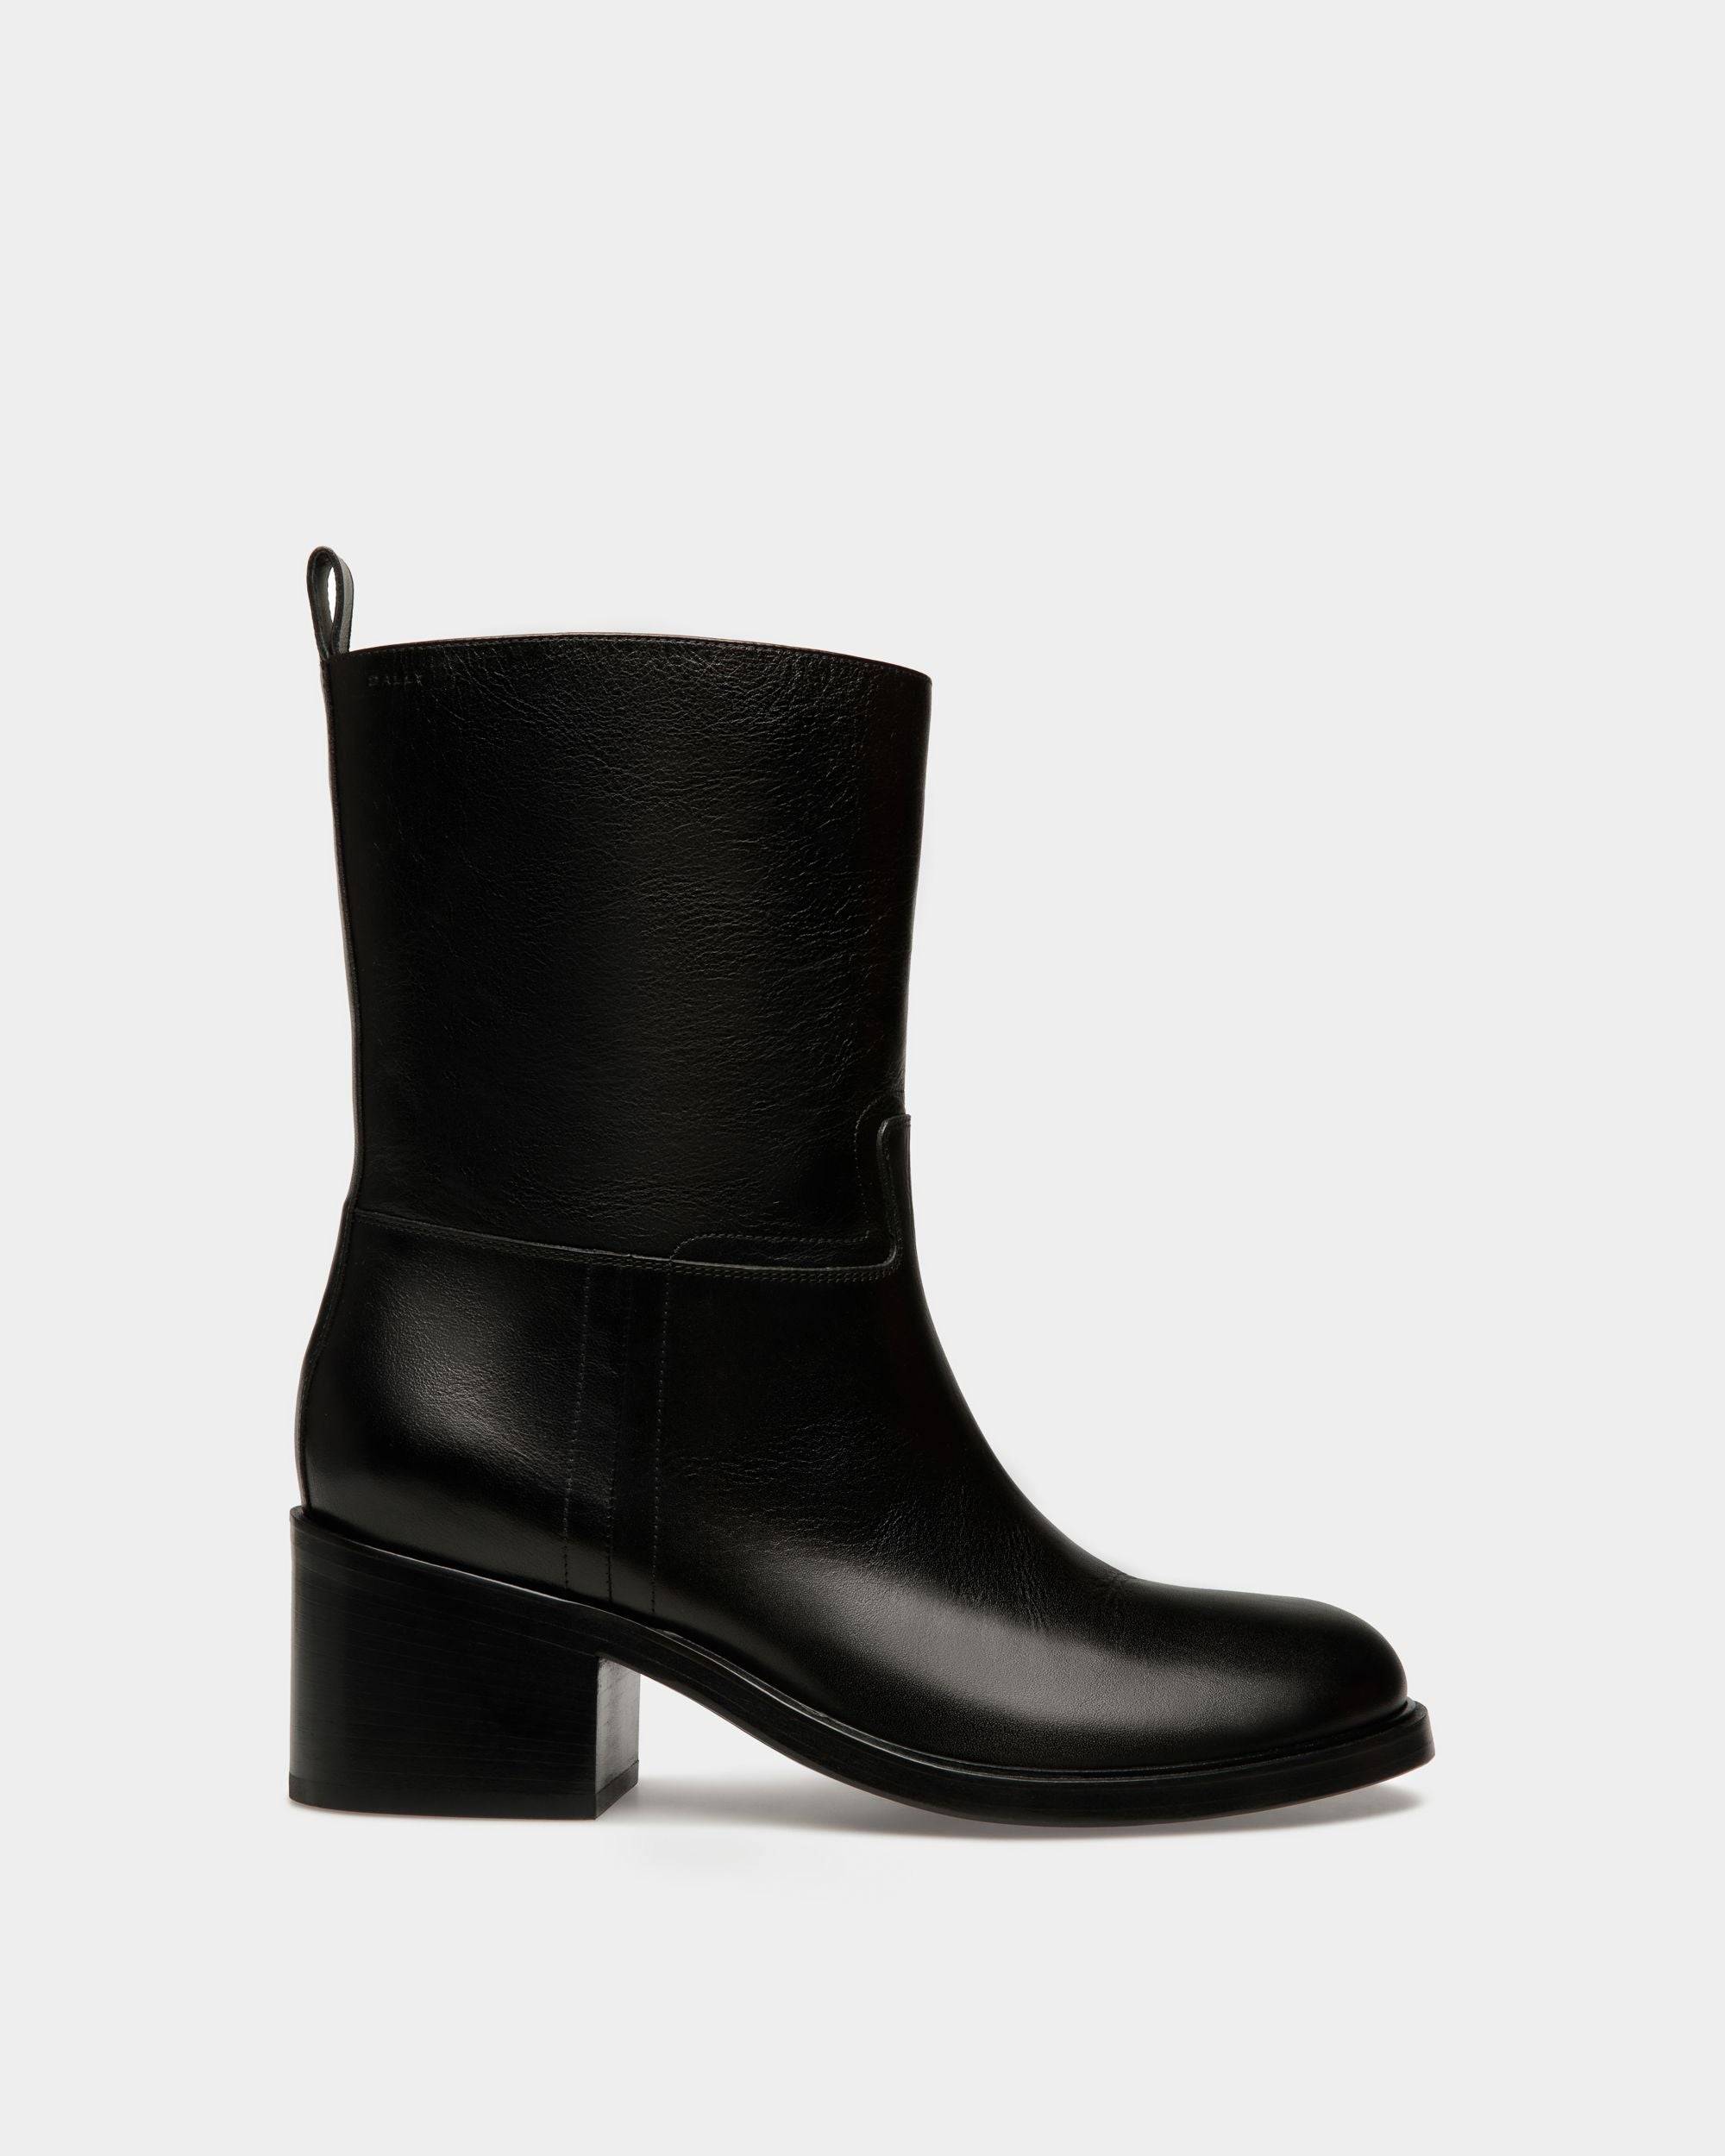 Peggy | Men's Boot in Black Leather | Bally | Still Life Side